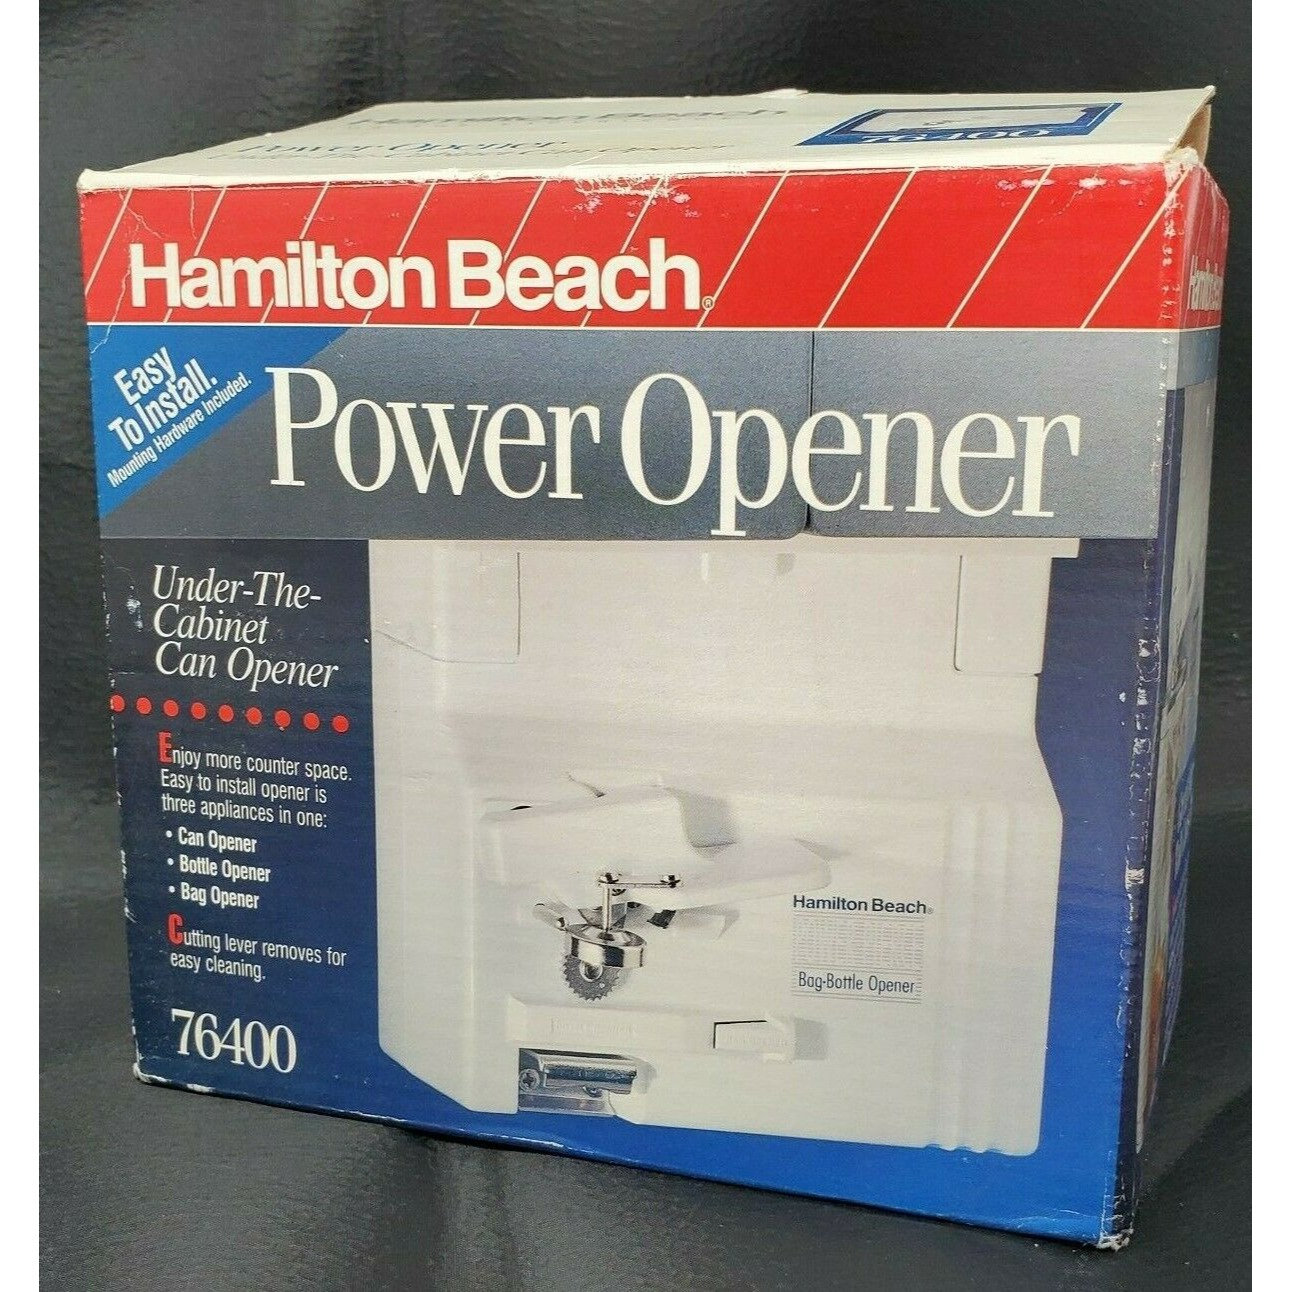 Hamilton Beach Power Opener 76400 Space Saver Under The Cabinet Can Opener